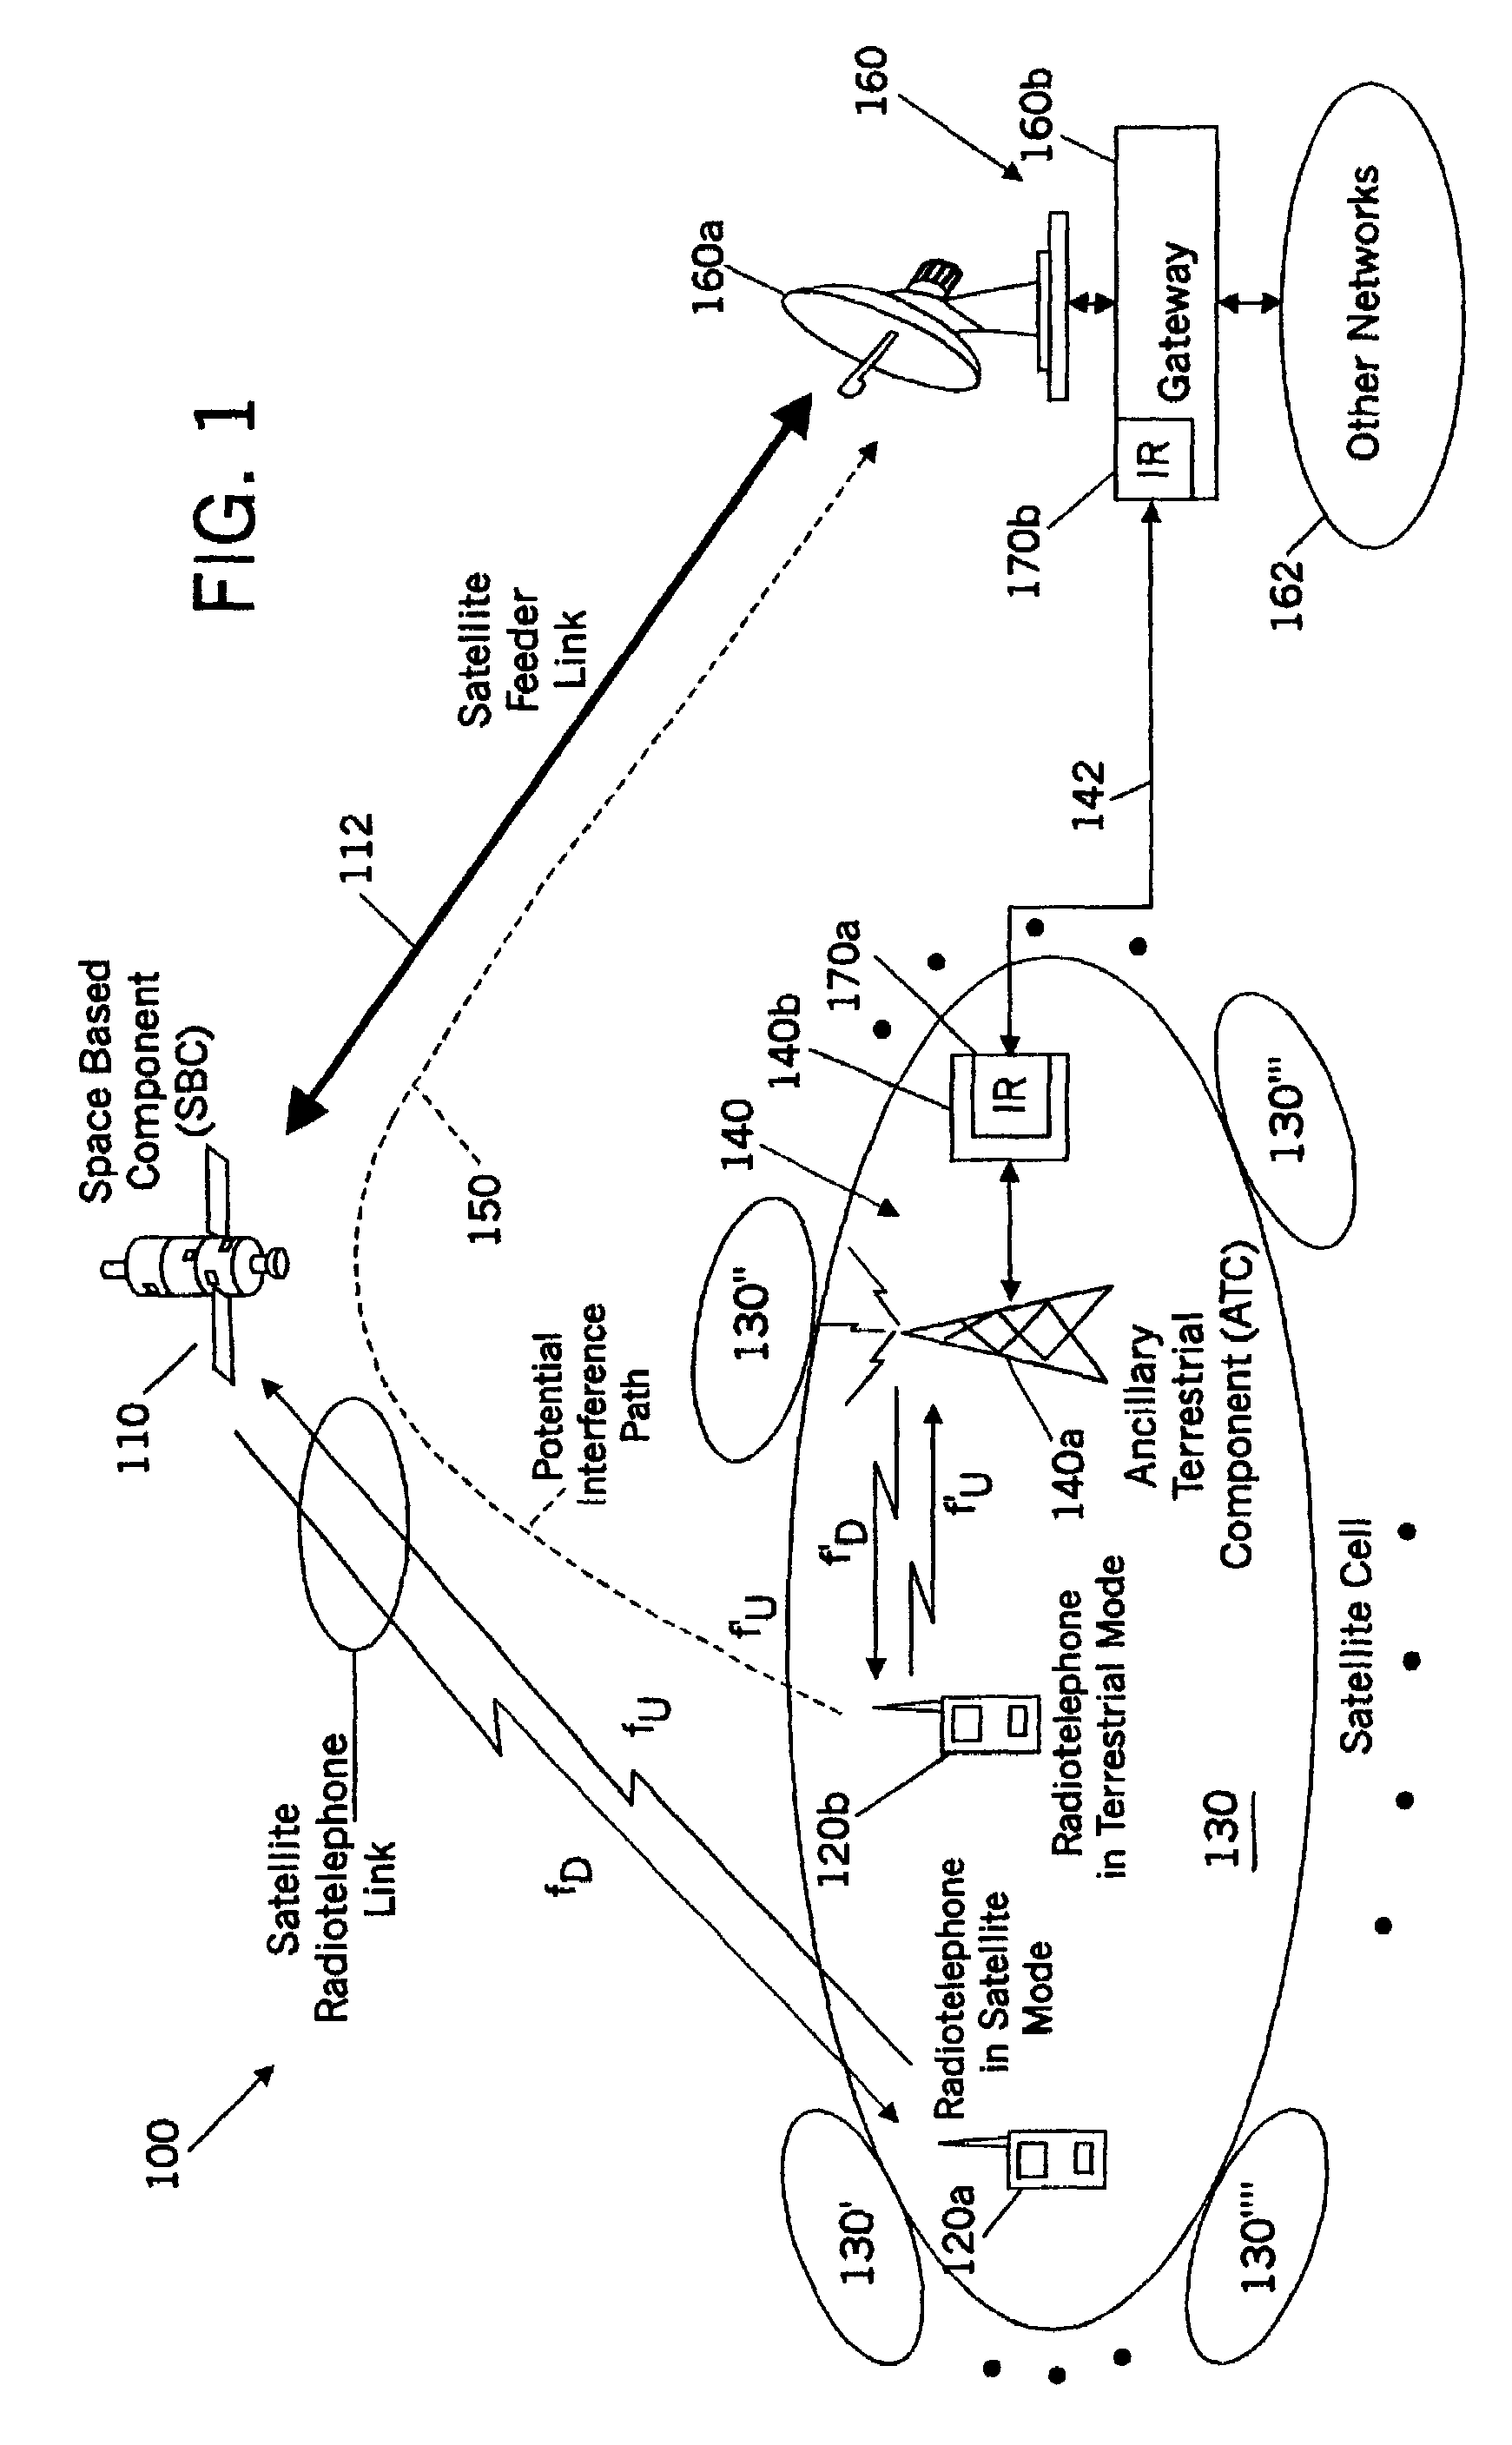 Systems and methods for terrestrial reuse of cellular satellite frequency spectrum in a time-division duplex and/or frequency-division duplex mode